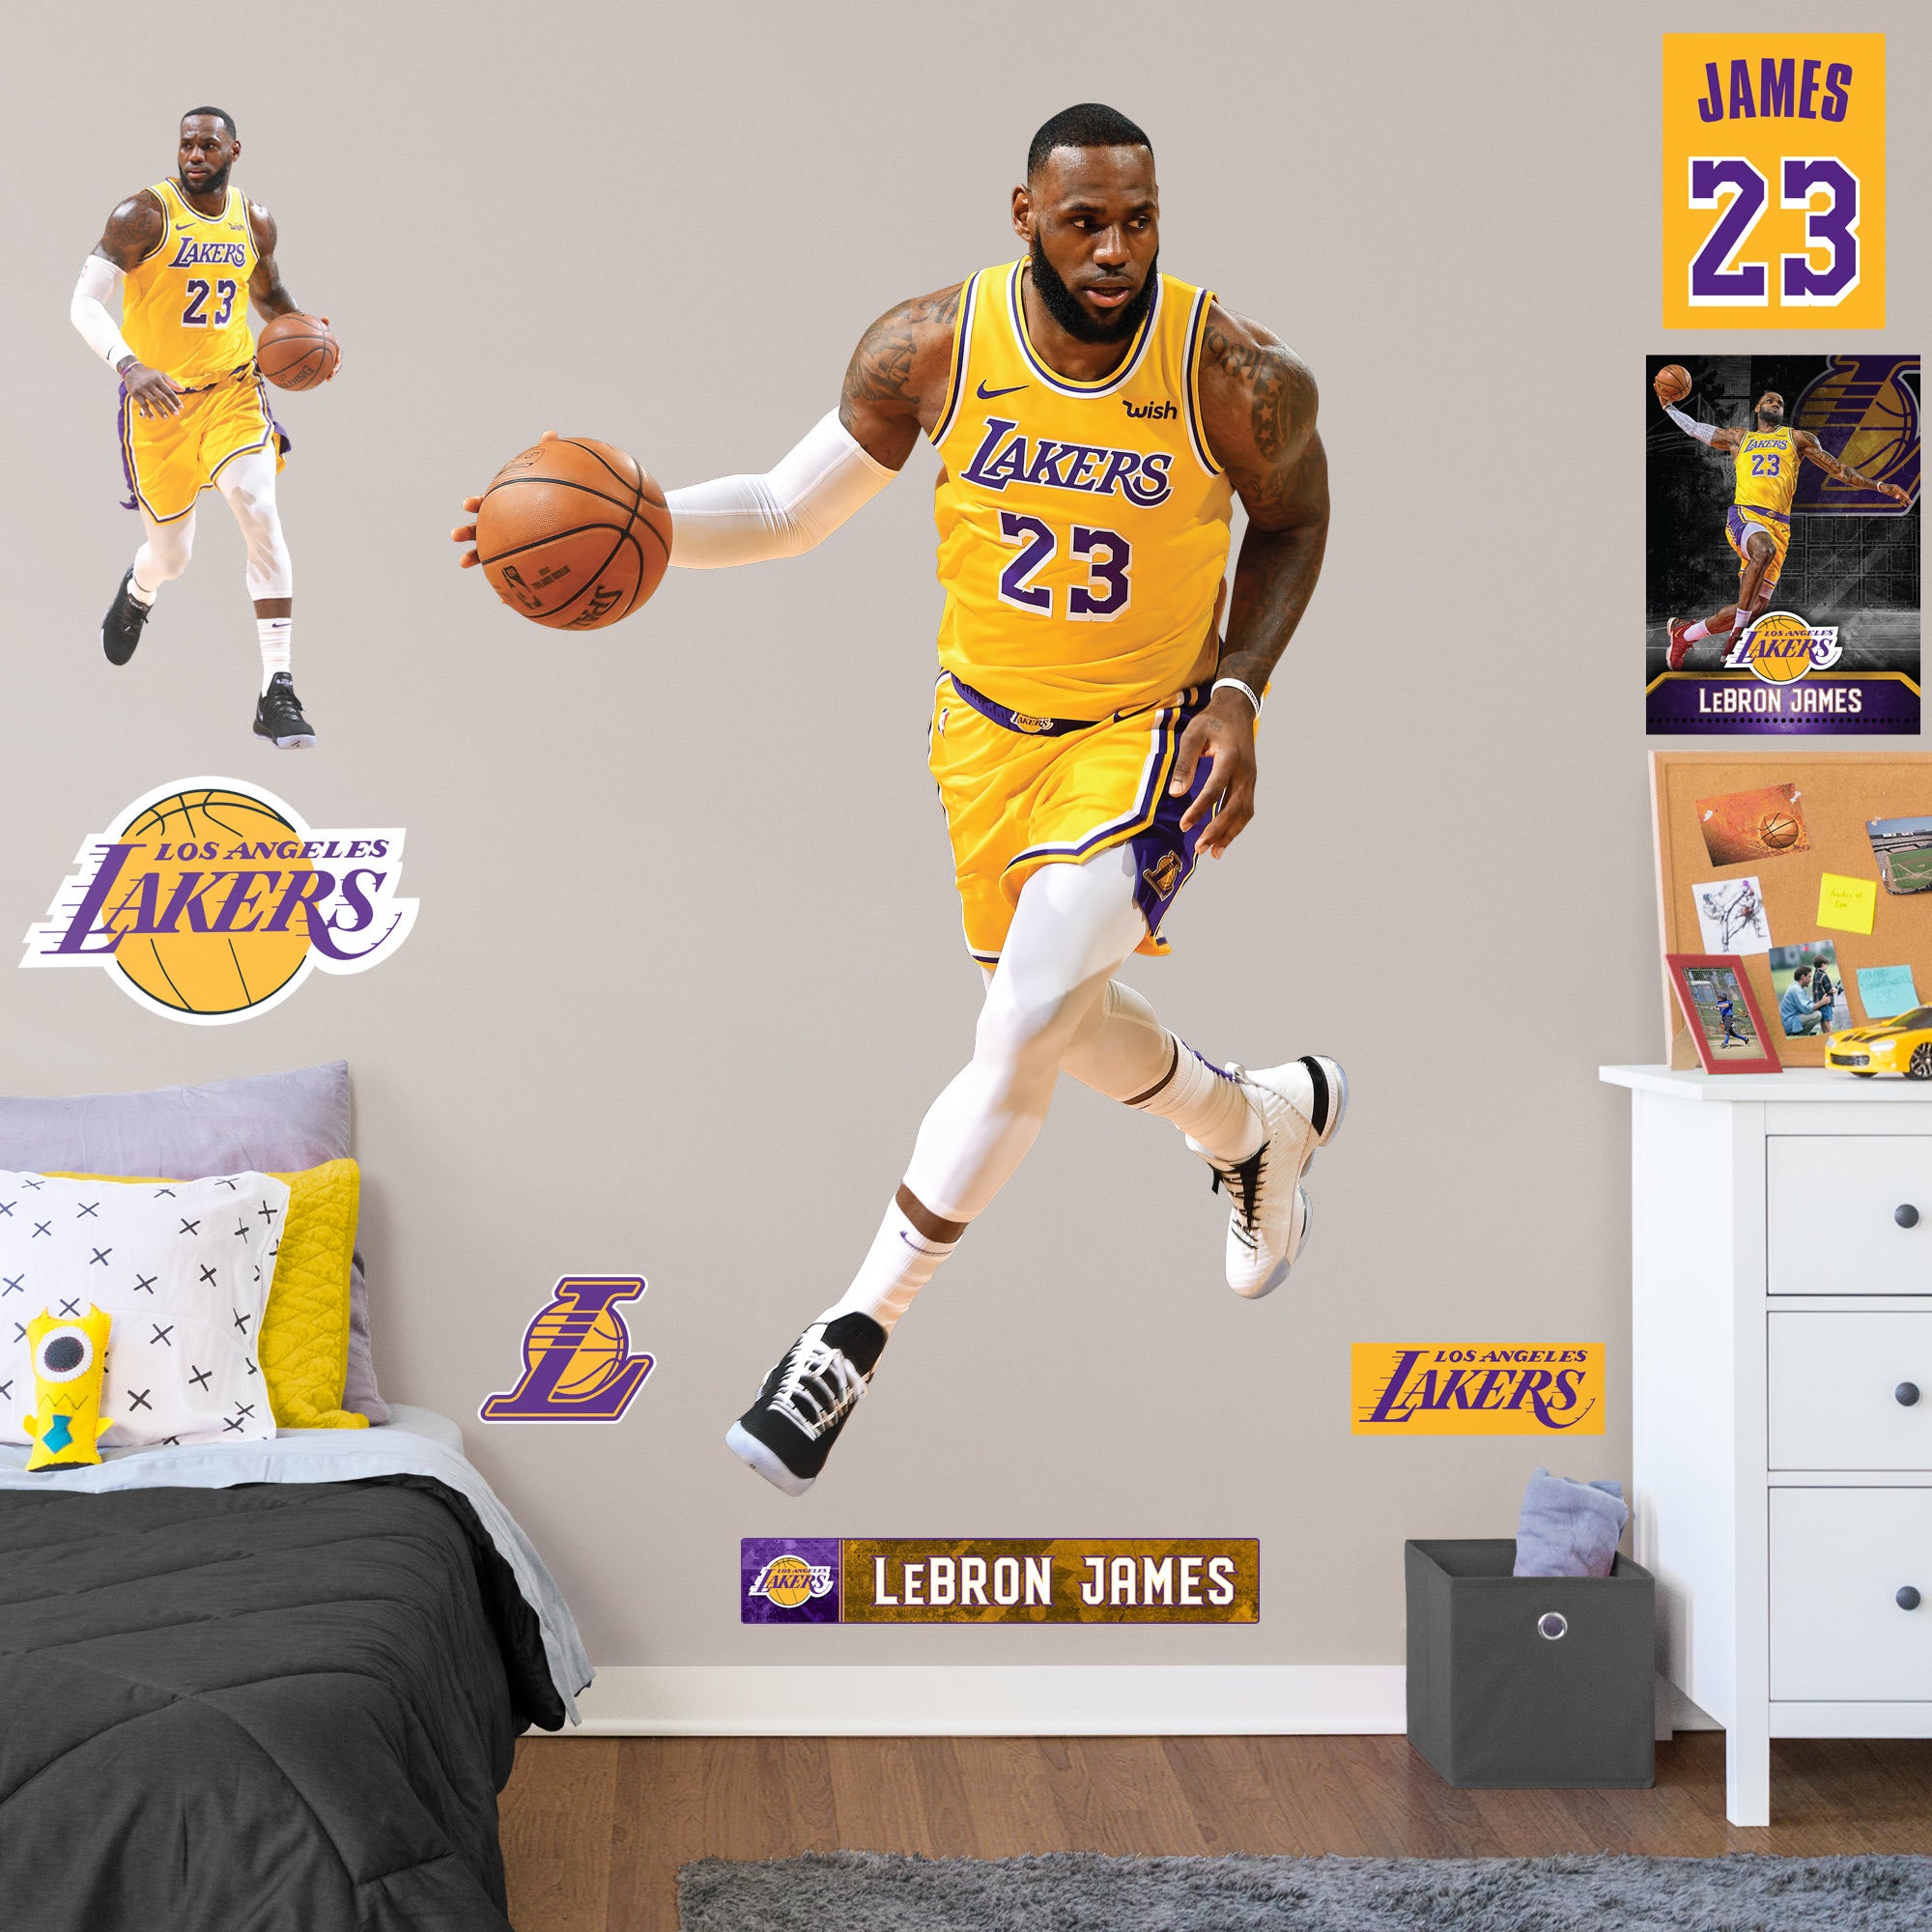 LeBron James for Los Angeles Lakers: Fast Break - Officially Licensed NBA Removable Wall Decal Life-Size Athlete + 9 Decals (50"